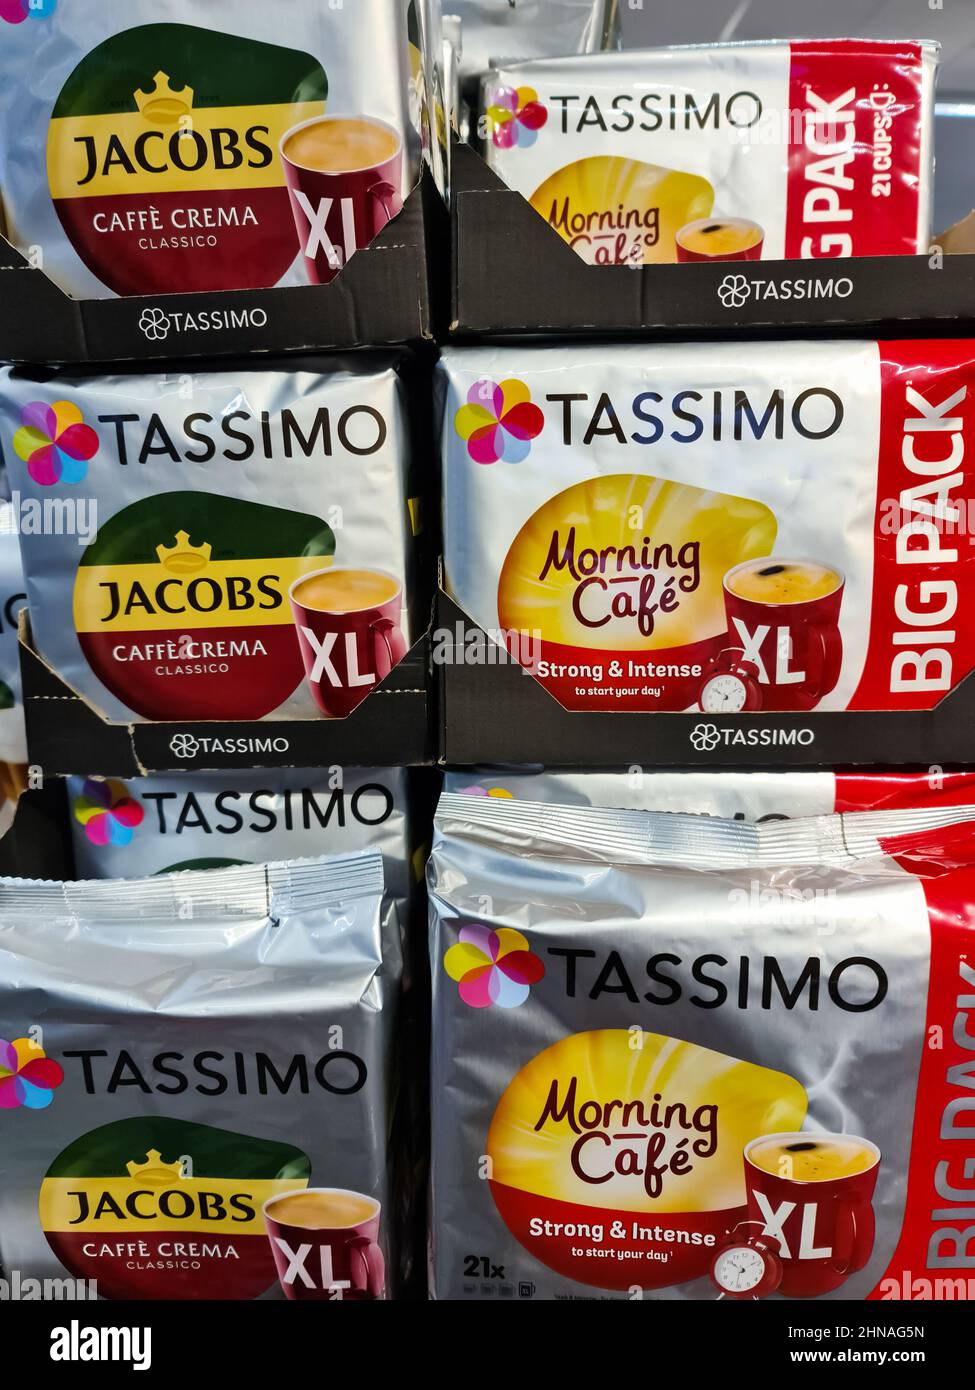 88 Tassimo Images, Stock Photos, 3D objects, & Vectors